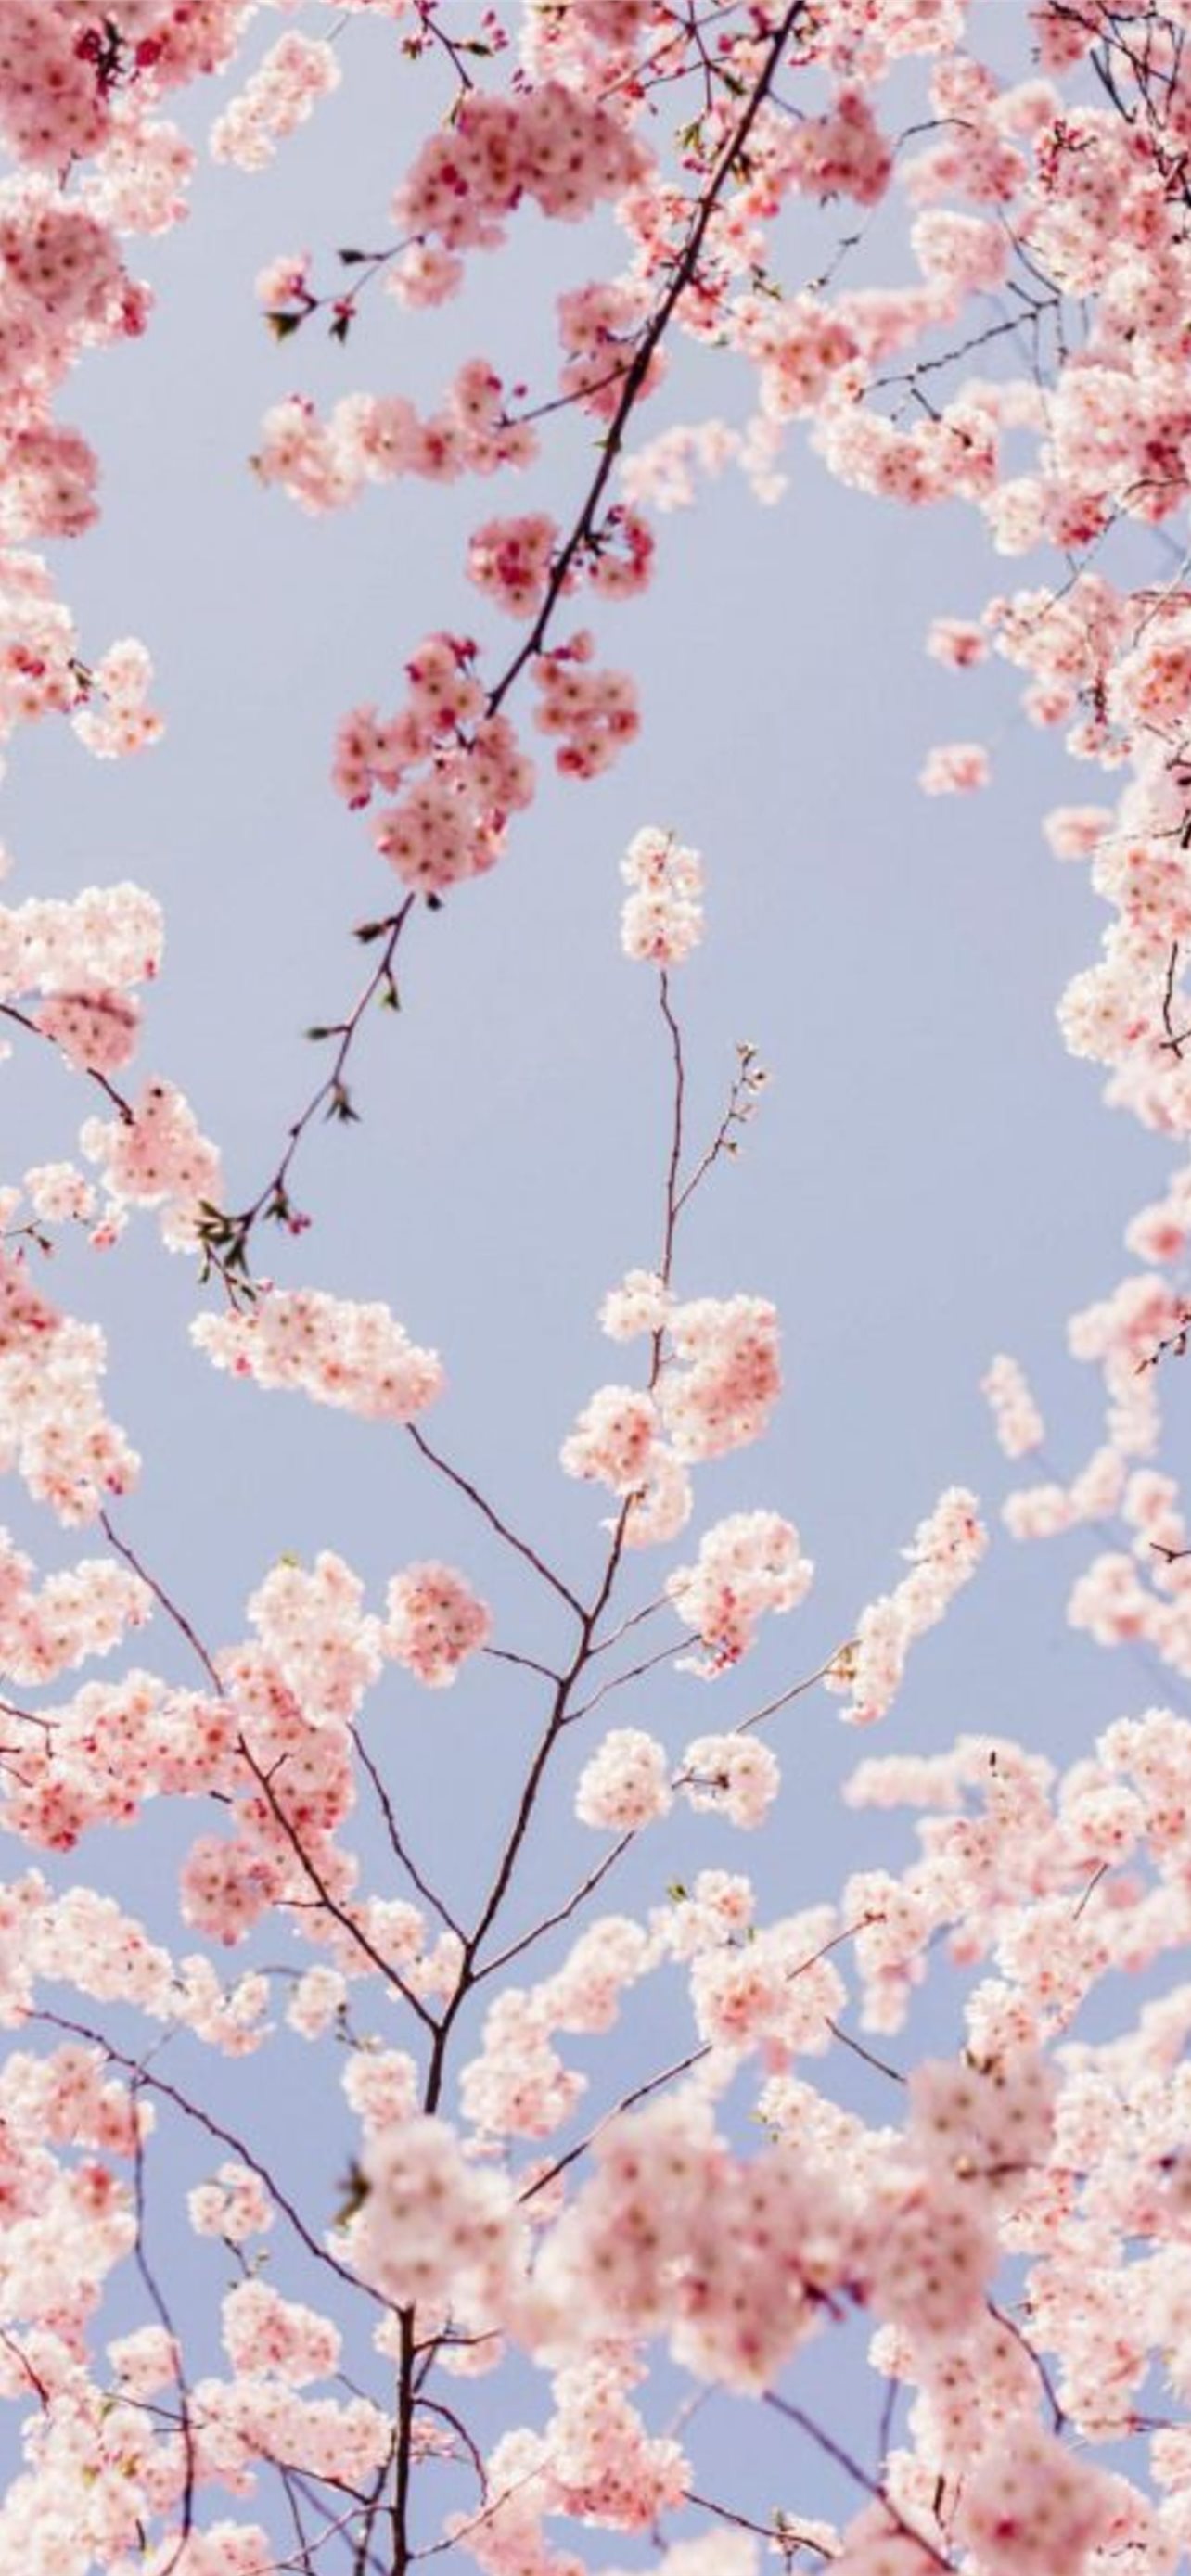 Premium AI Image  Cherry blossom wallpapers for iphone and android these  are the best wallpapers for iphone and android iphone wallpapers for iphone  android android and iphone iphone wallpaper